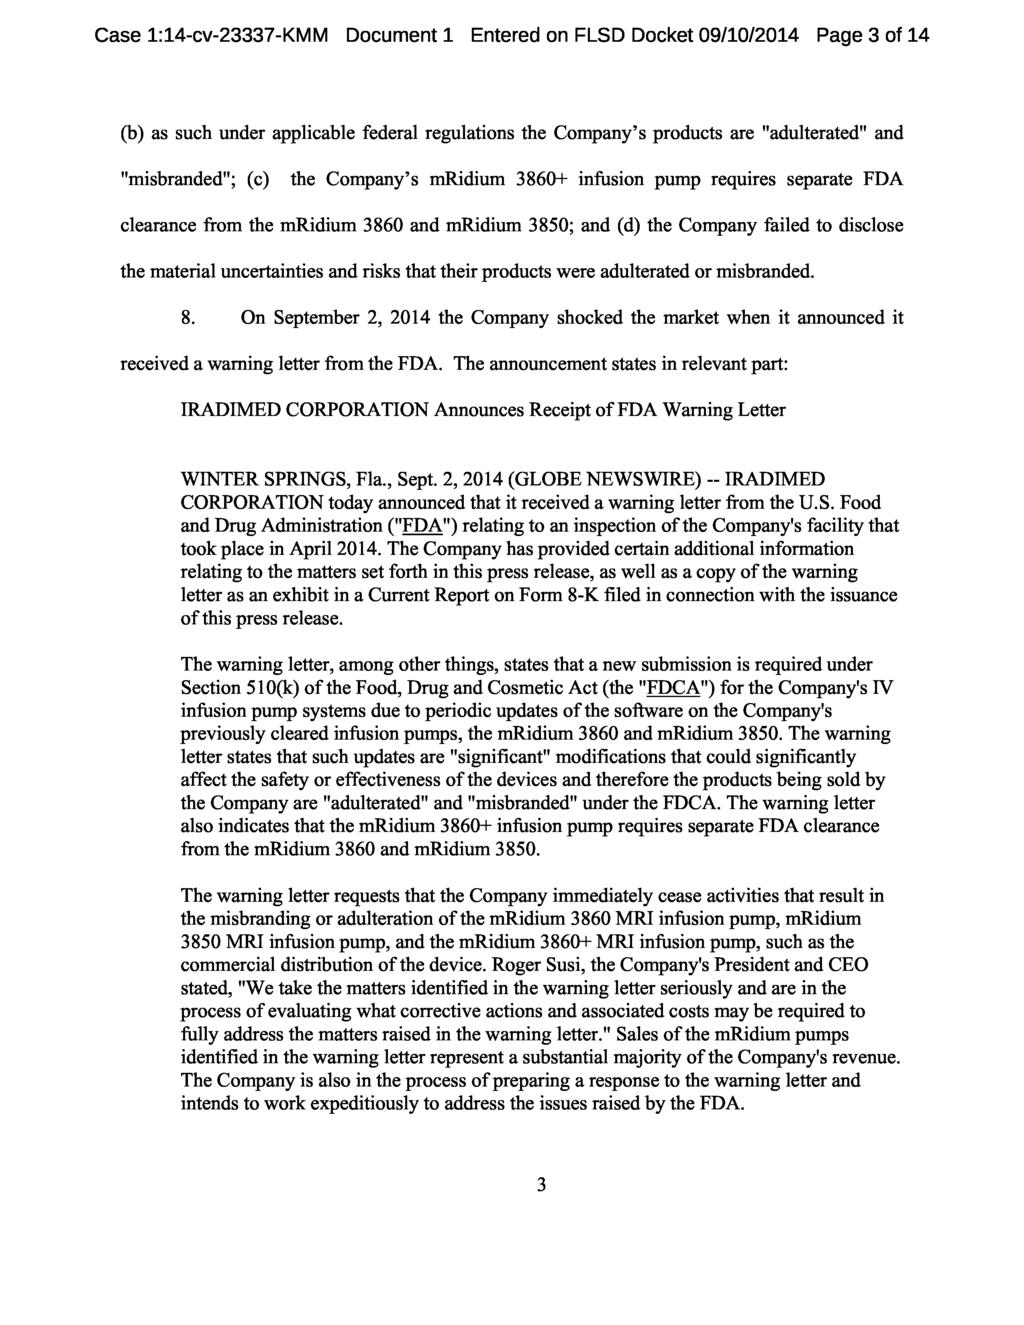 Case 1:14-cv-23337-KMM Document 1 Entered on FLSD Docket 09/10/2014 Page 3 of 14 (b) as such under applicable federal regulations the Company s products are "adulterated" and "misbranded"; (c) the